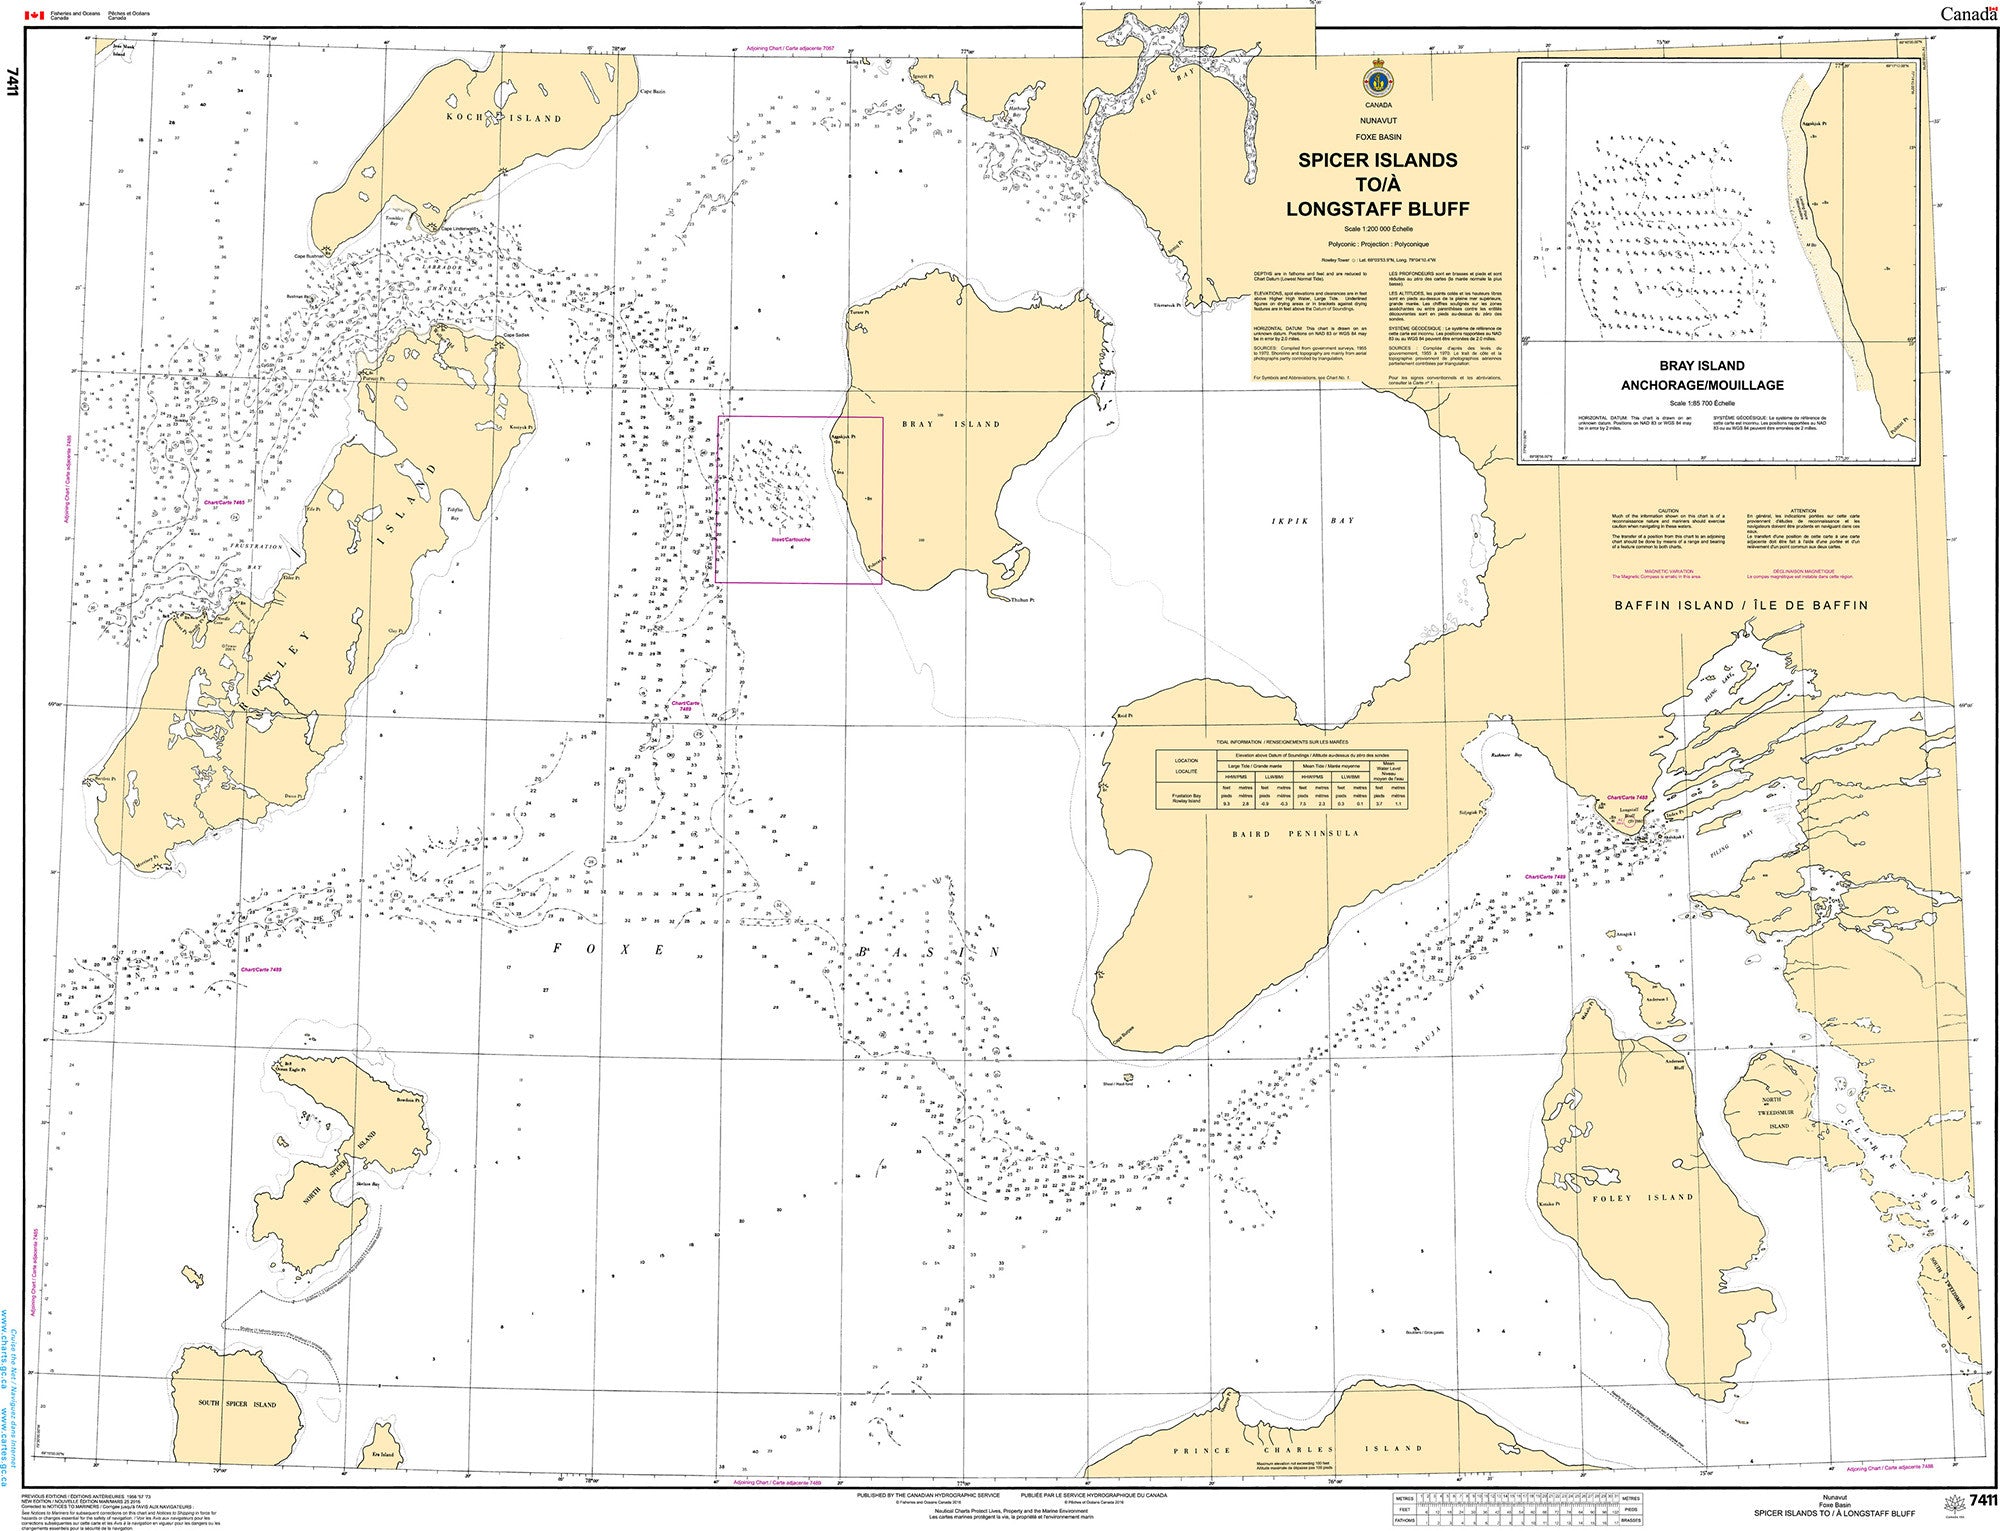 Canadian Hydrographic Service Nautical Chart CHS7411: Spicer Islands to Longstaff Bluff